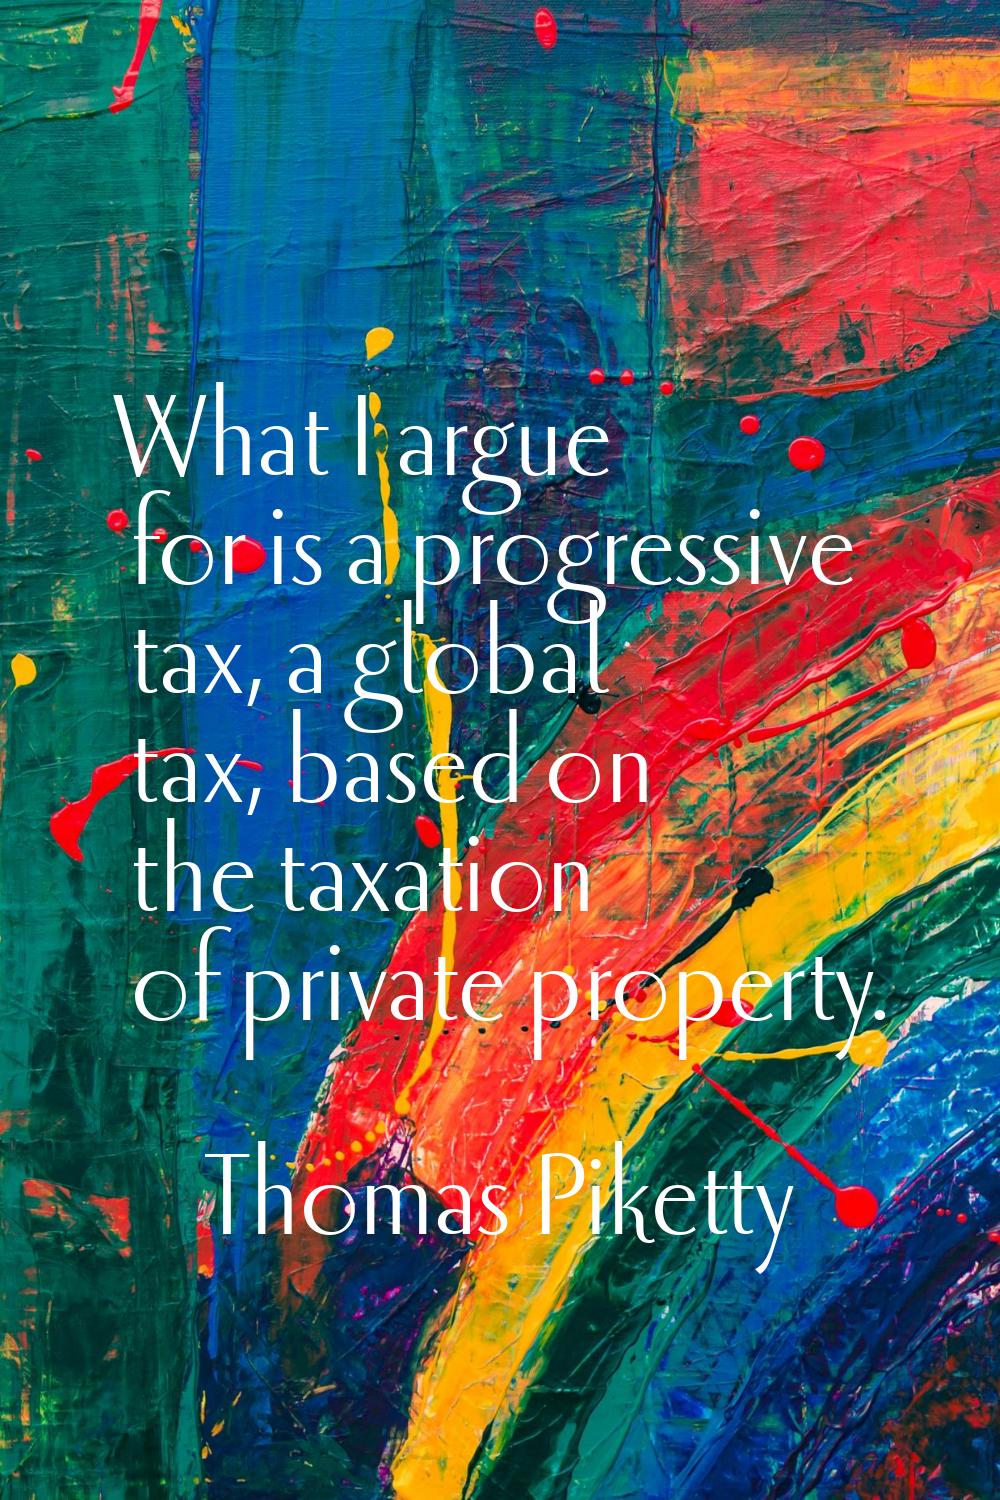 What I argue for is a progressive tax, a global tax, based on the taxation of private property.